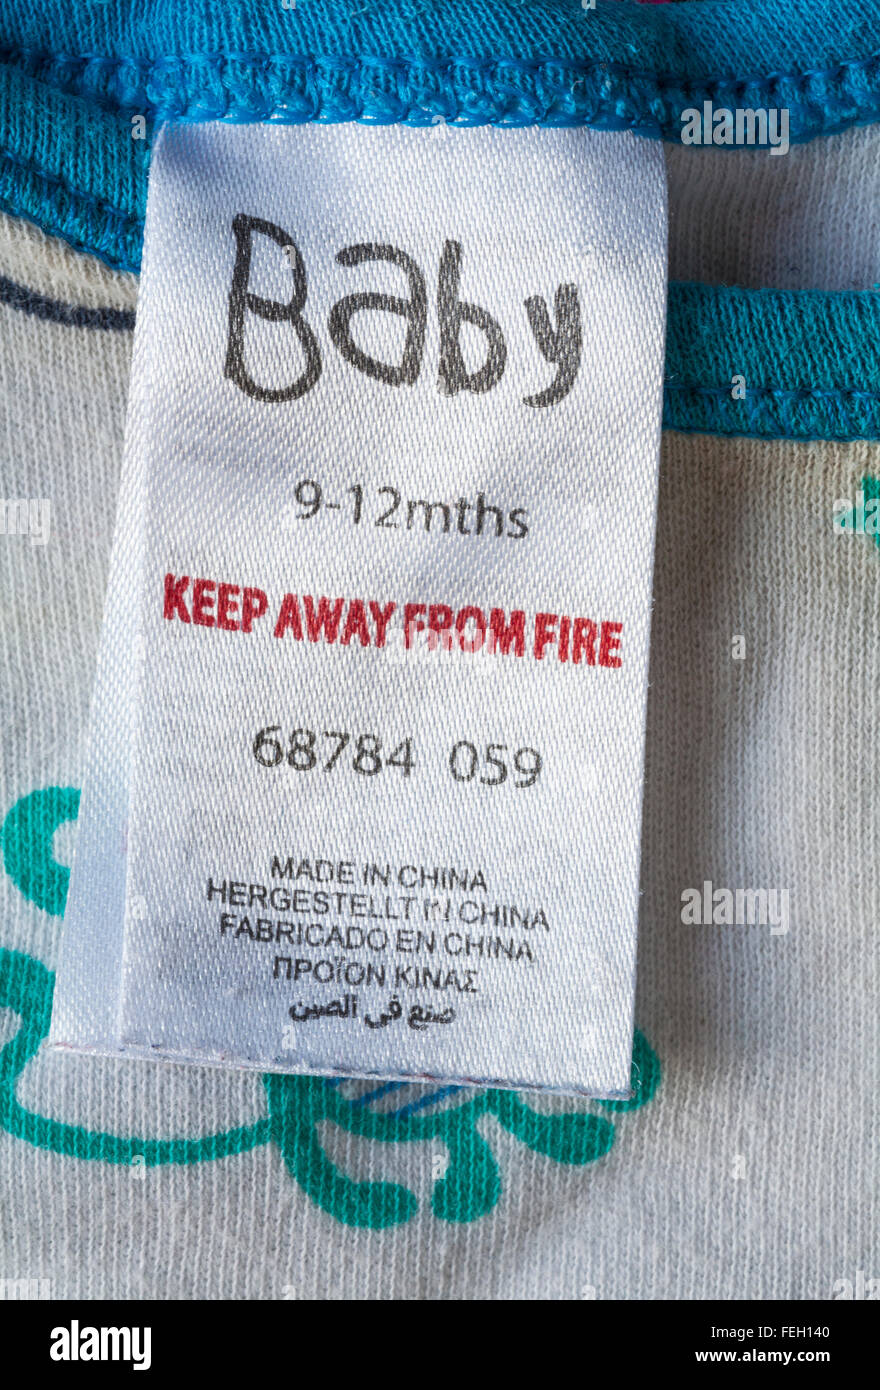 Keep away from fire label in Baby baby grow garment for 9-12 mths made in China - sold in the UK United Kingdom, Great Britain Stock Photo